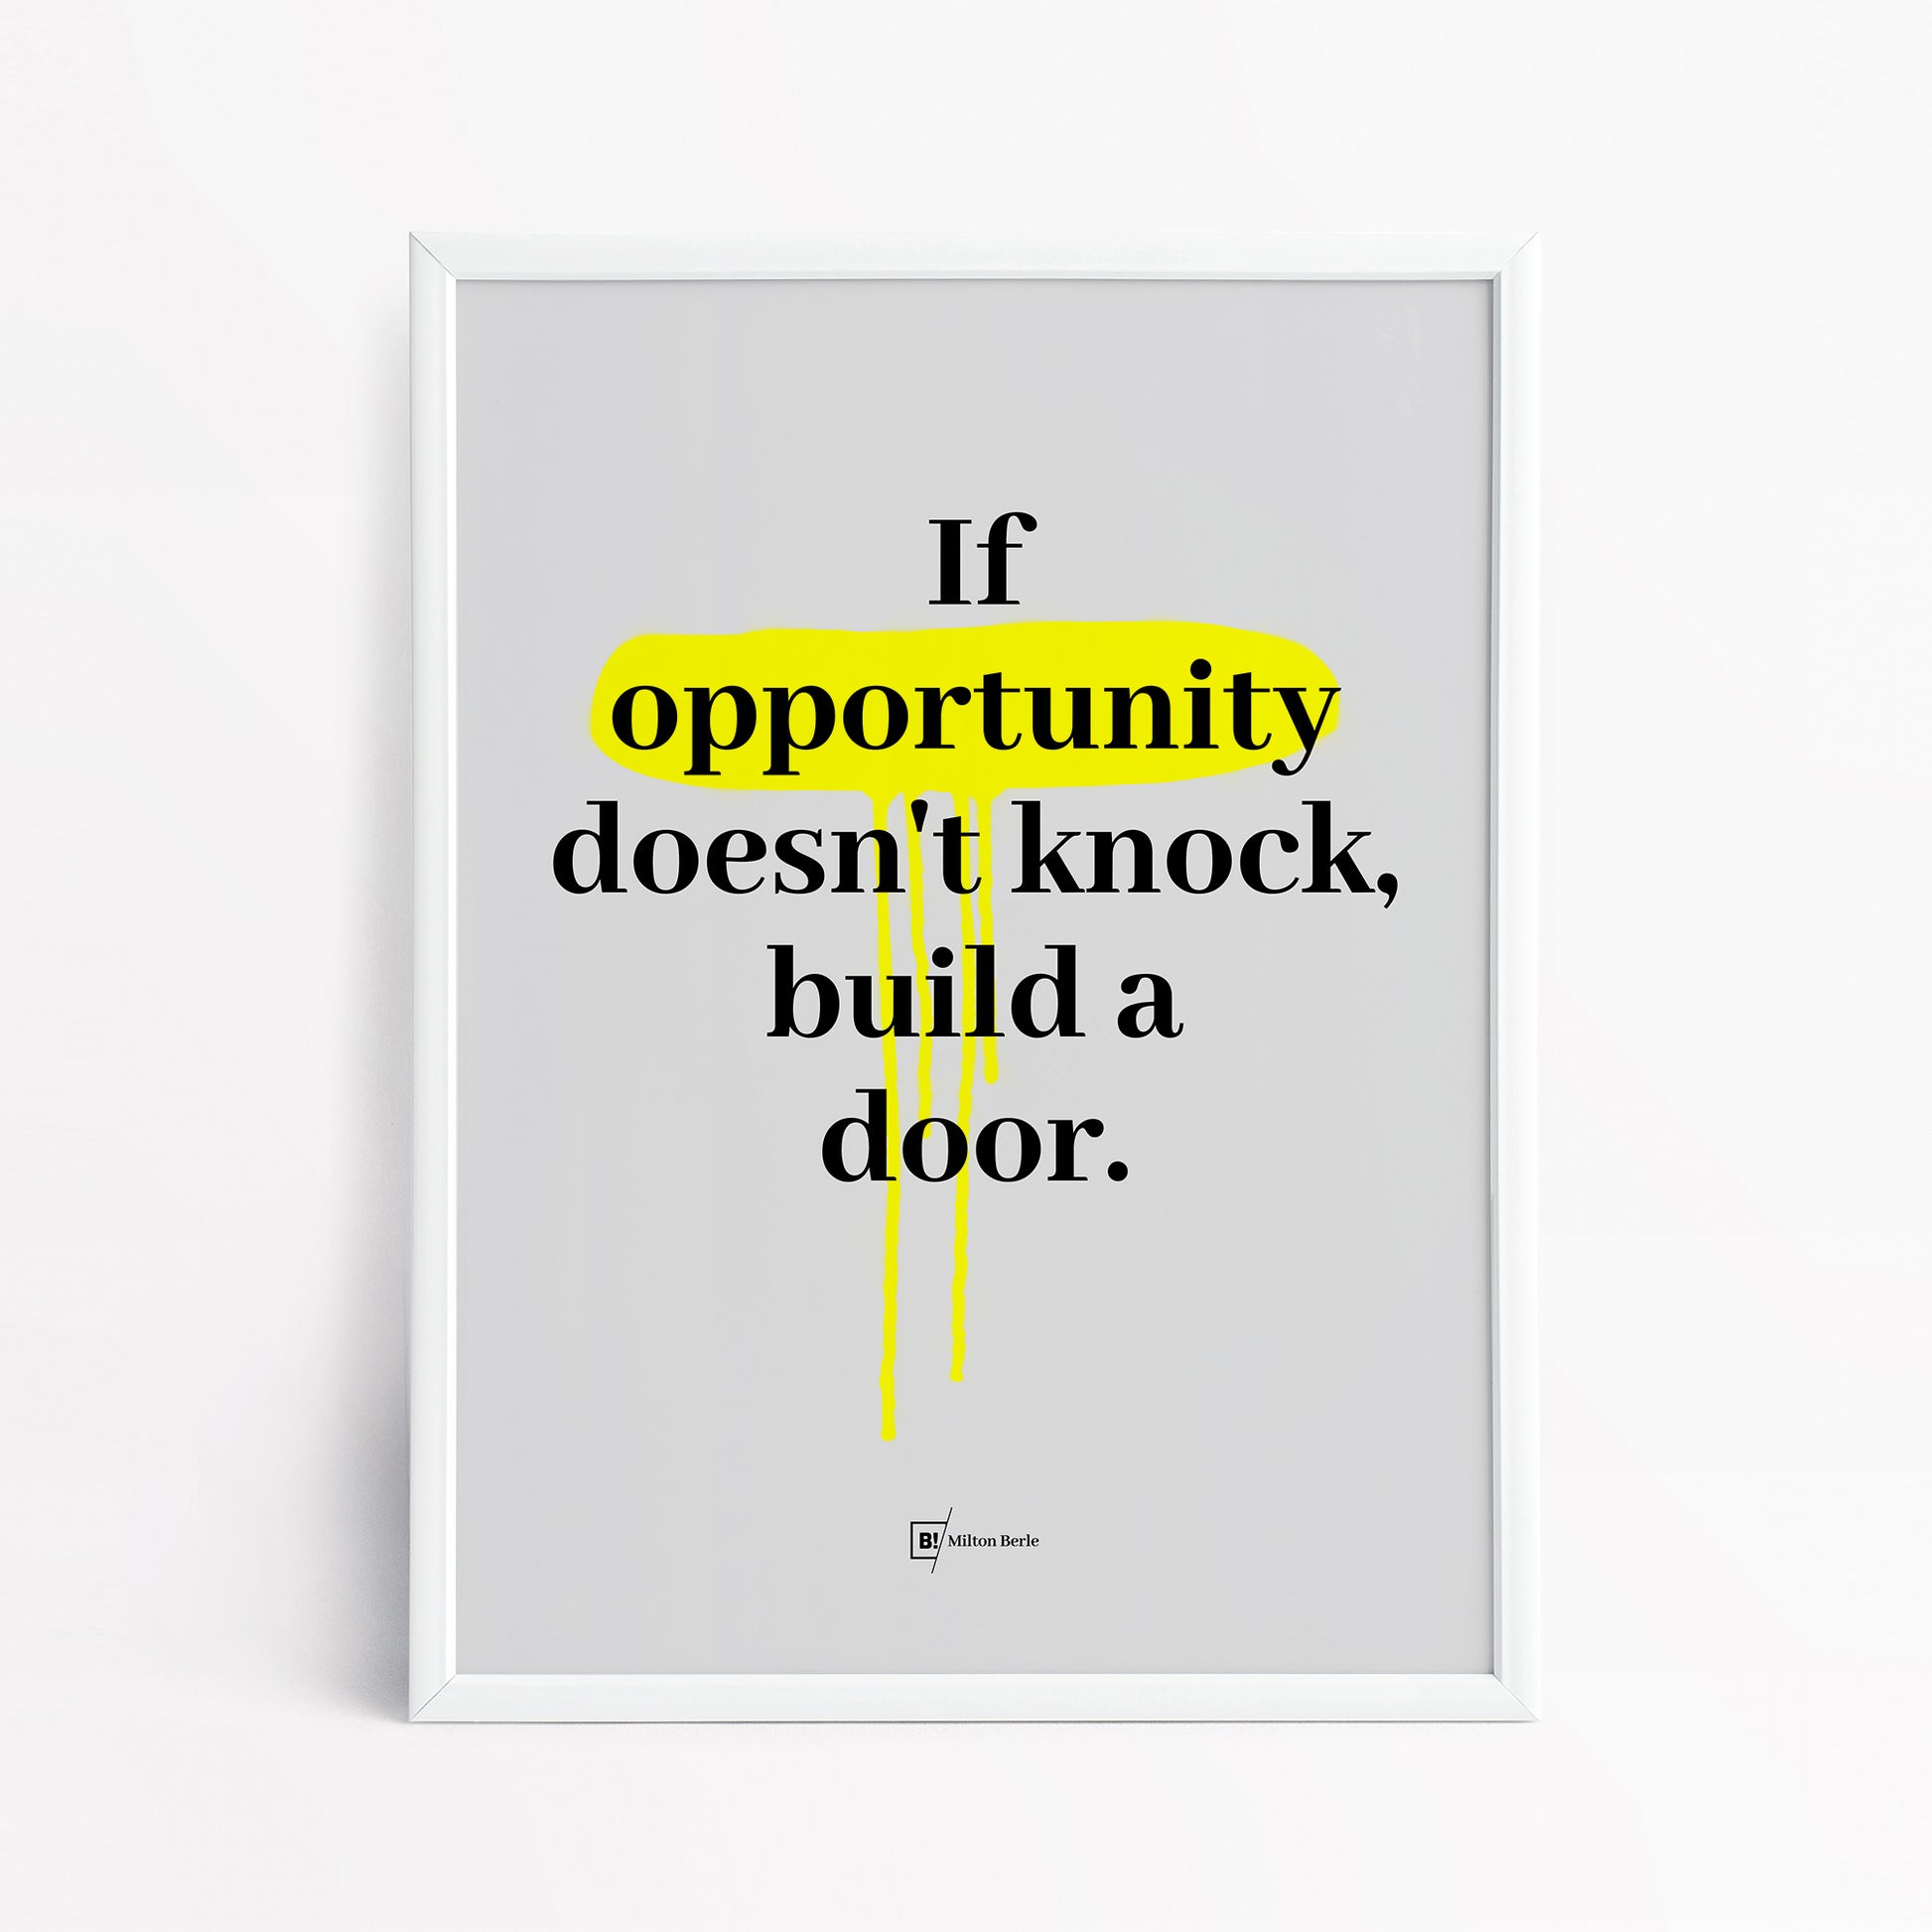 Be inspired by Milton Berle's famous "If opportunity doesn't knock, build a door" quote art print. This artwork was printed using the giclée process on archival acid-free paper and is presented in a simple white frame that captures its timeless beauty in every detail.